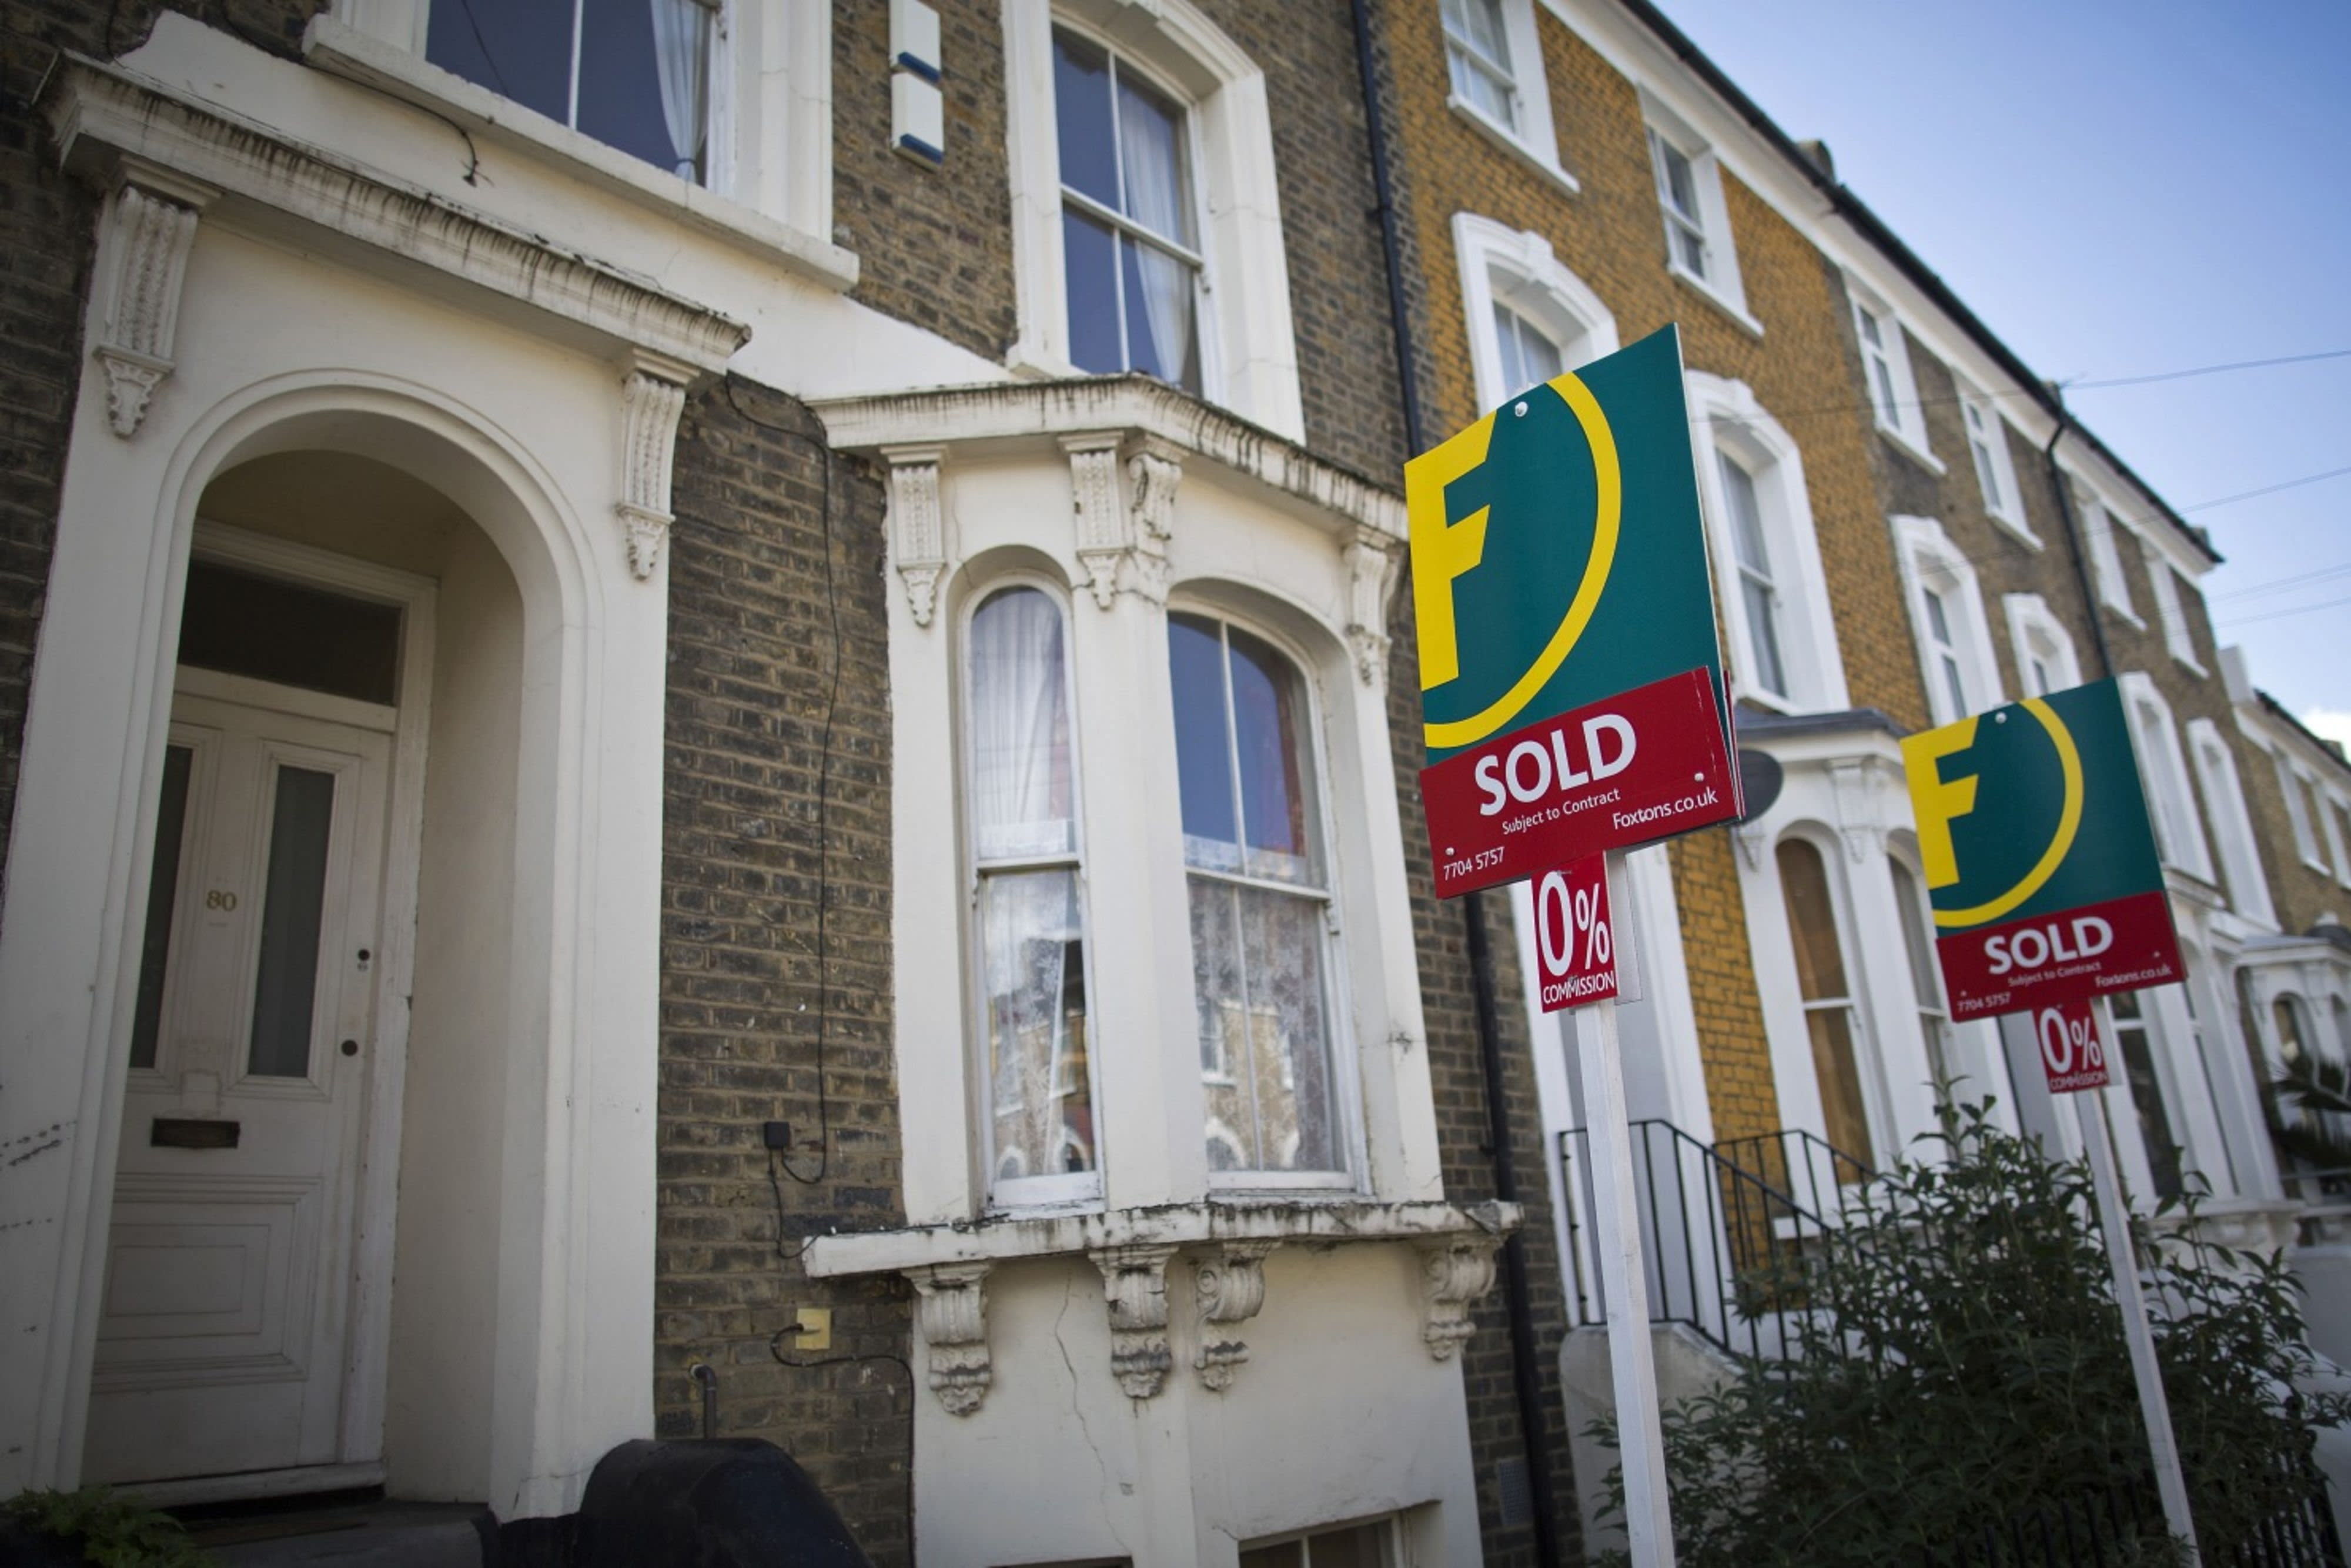 Disputes over valuations to rise as housing market slows